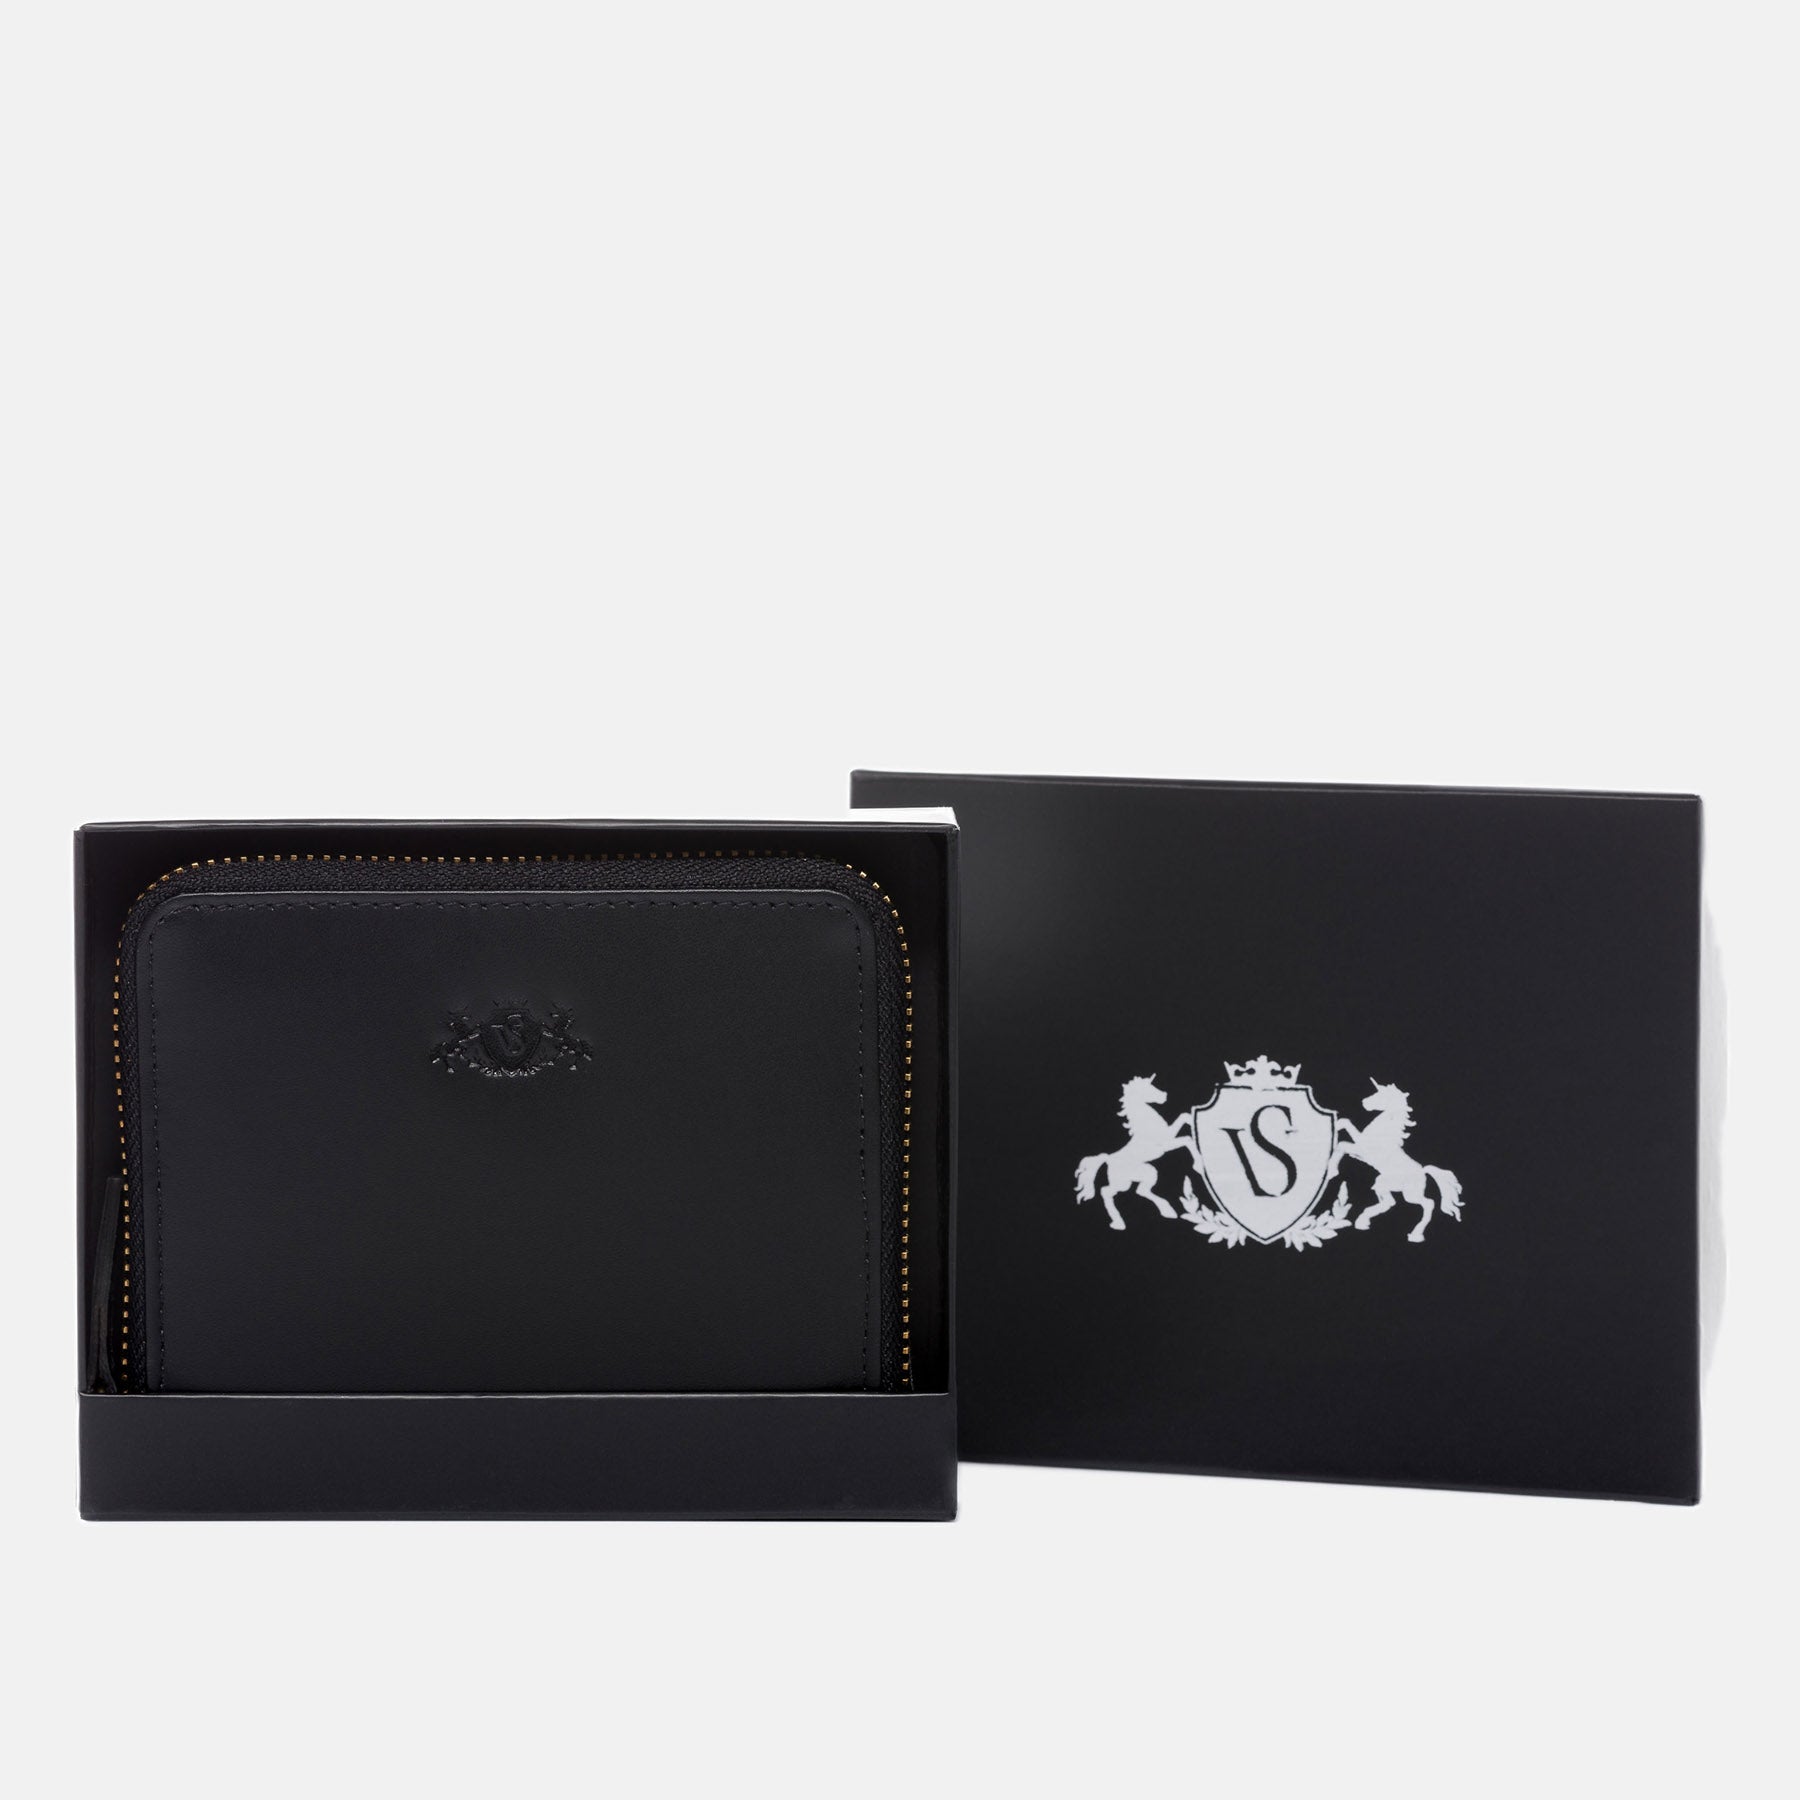 Wallet HANNAH smooth leather black